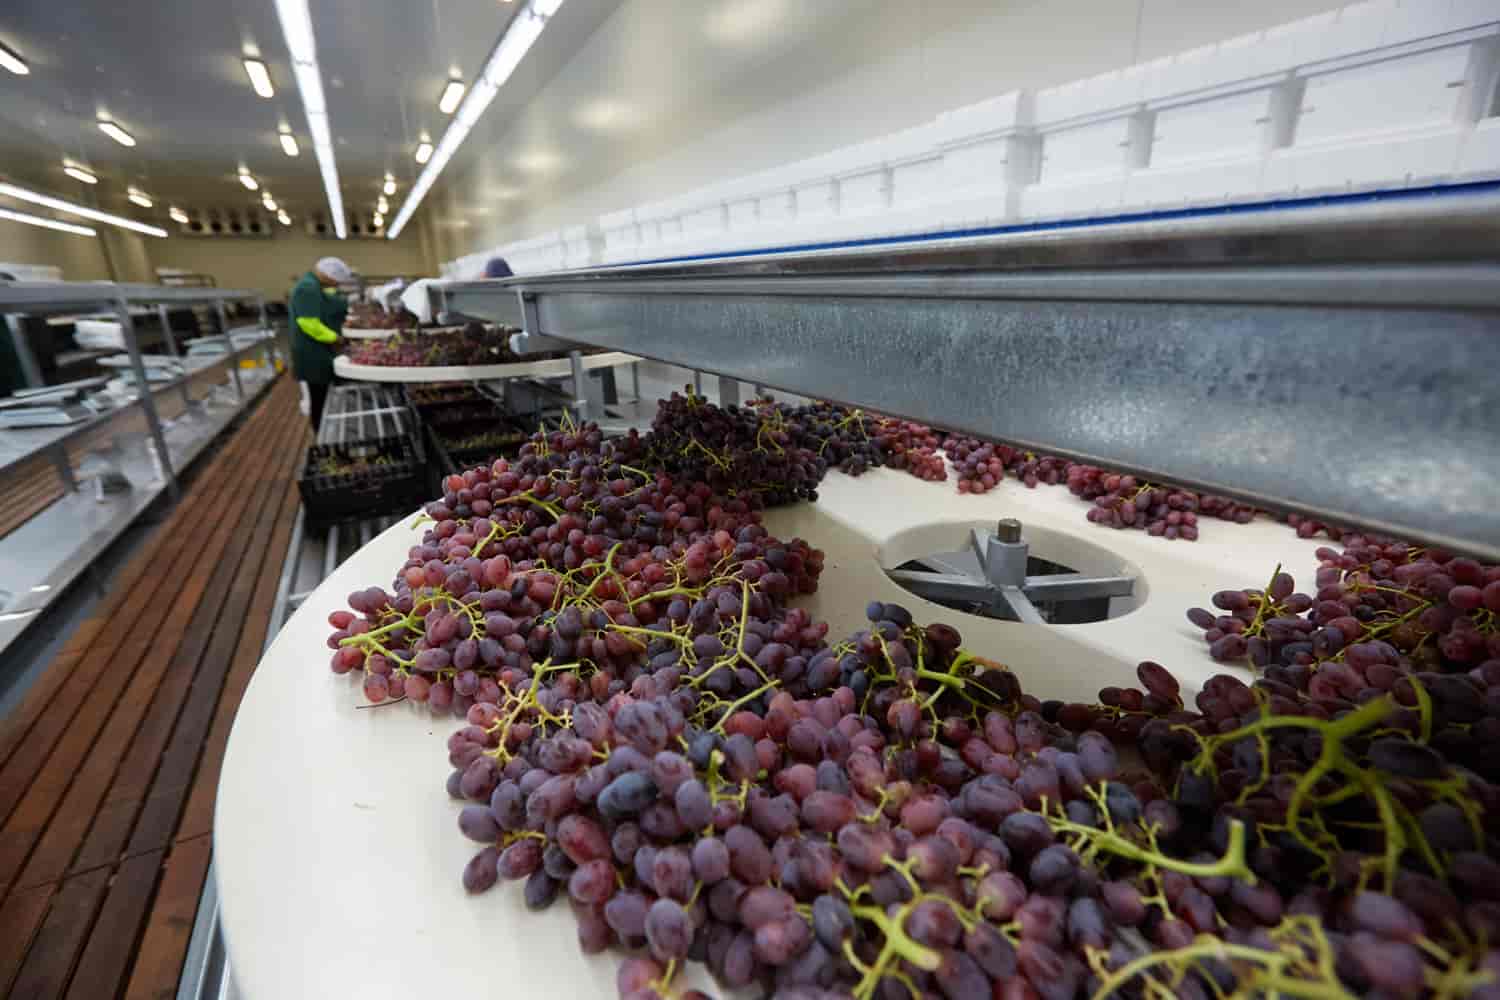 Grapes laid out for packaging and sorting in the factory.